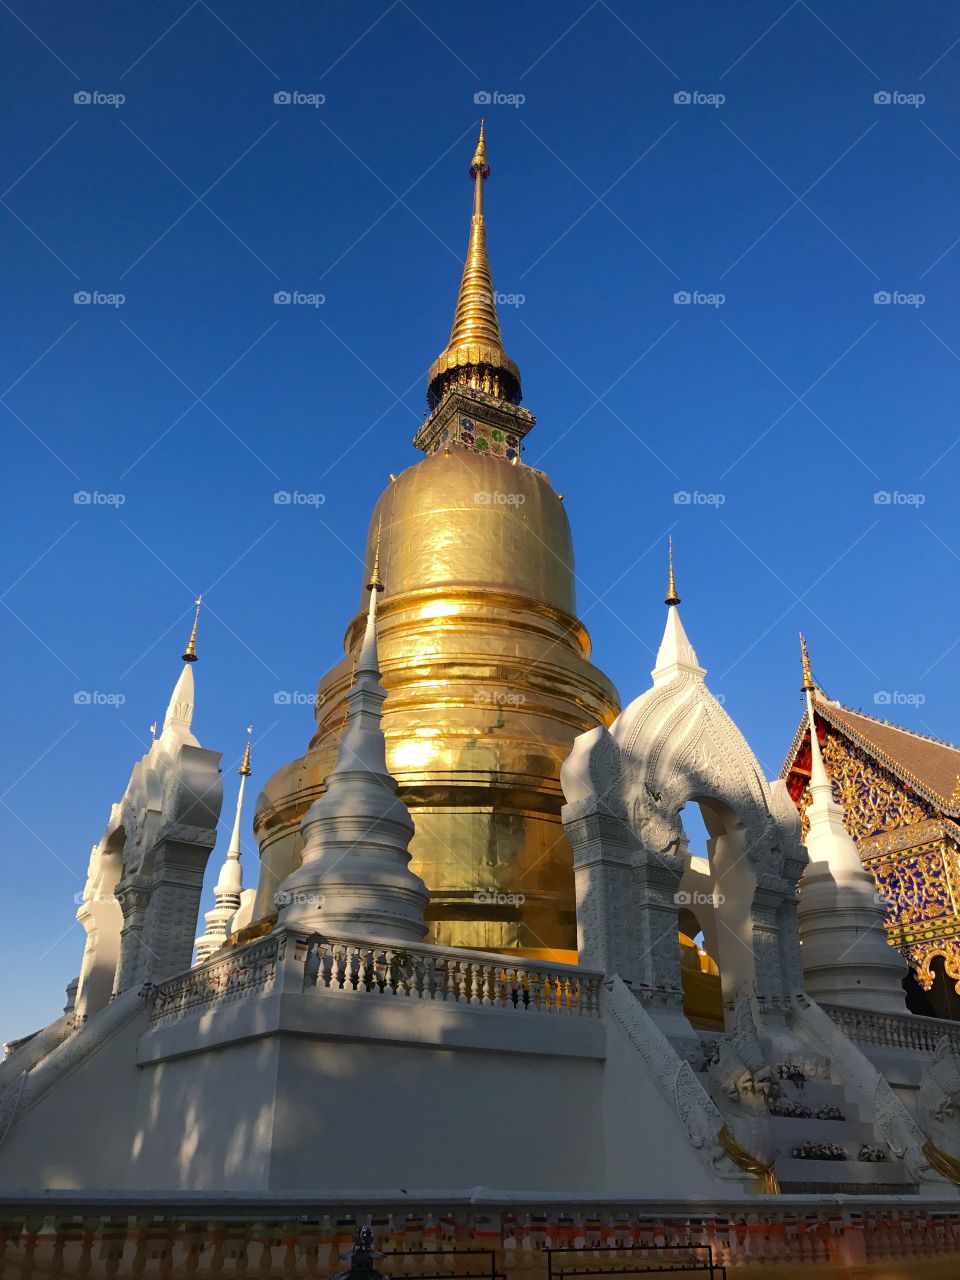 Golden pagoda at Wat Suan Dok, a Buddhist temple in Chiang Mai, Thailand